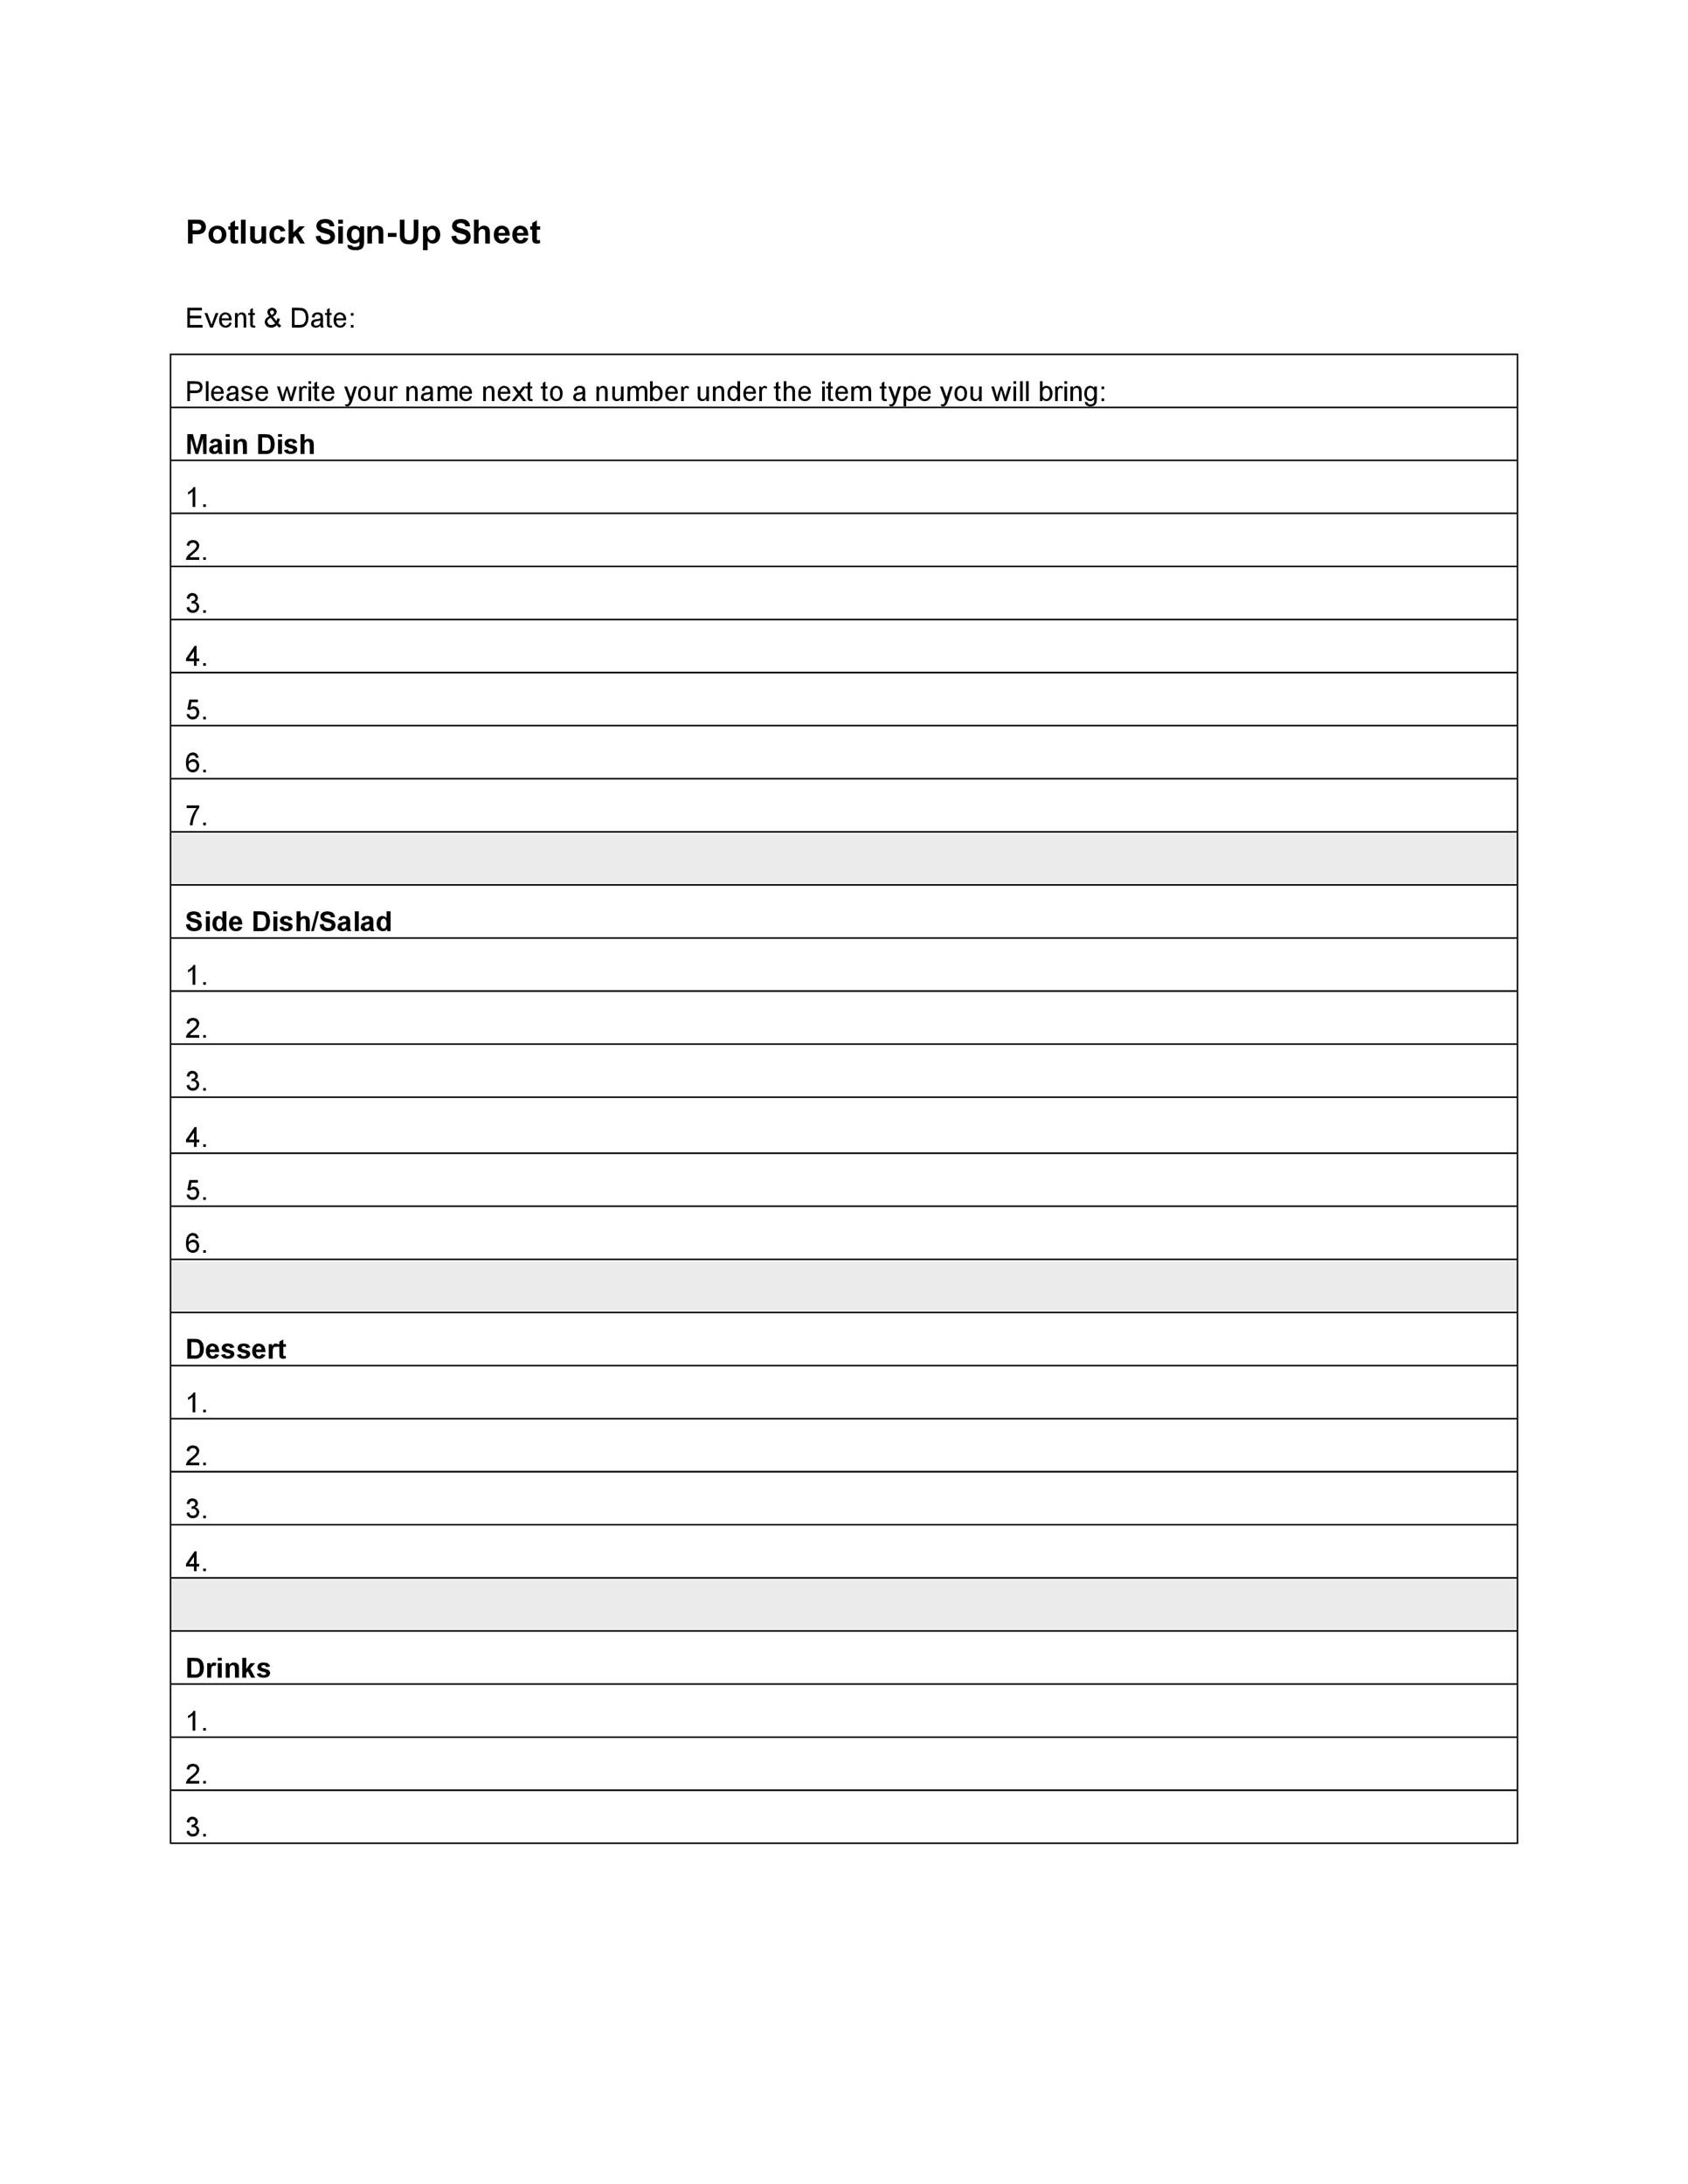 40-sign-up-sheet-sign-in-sheet-templates-word-excel